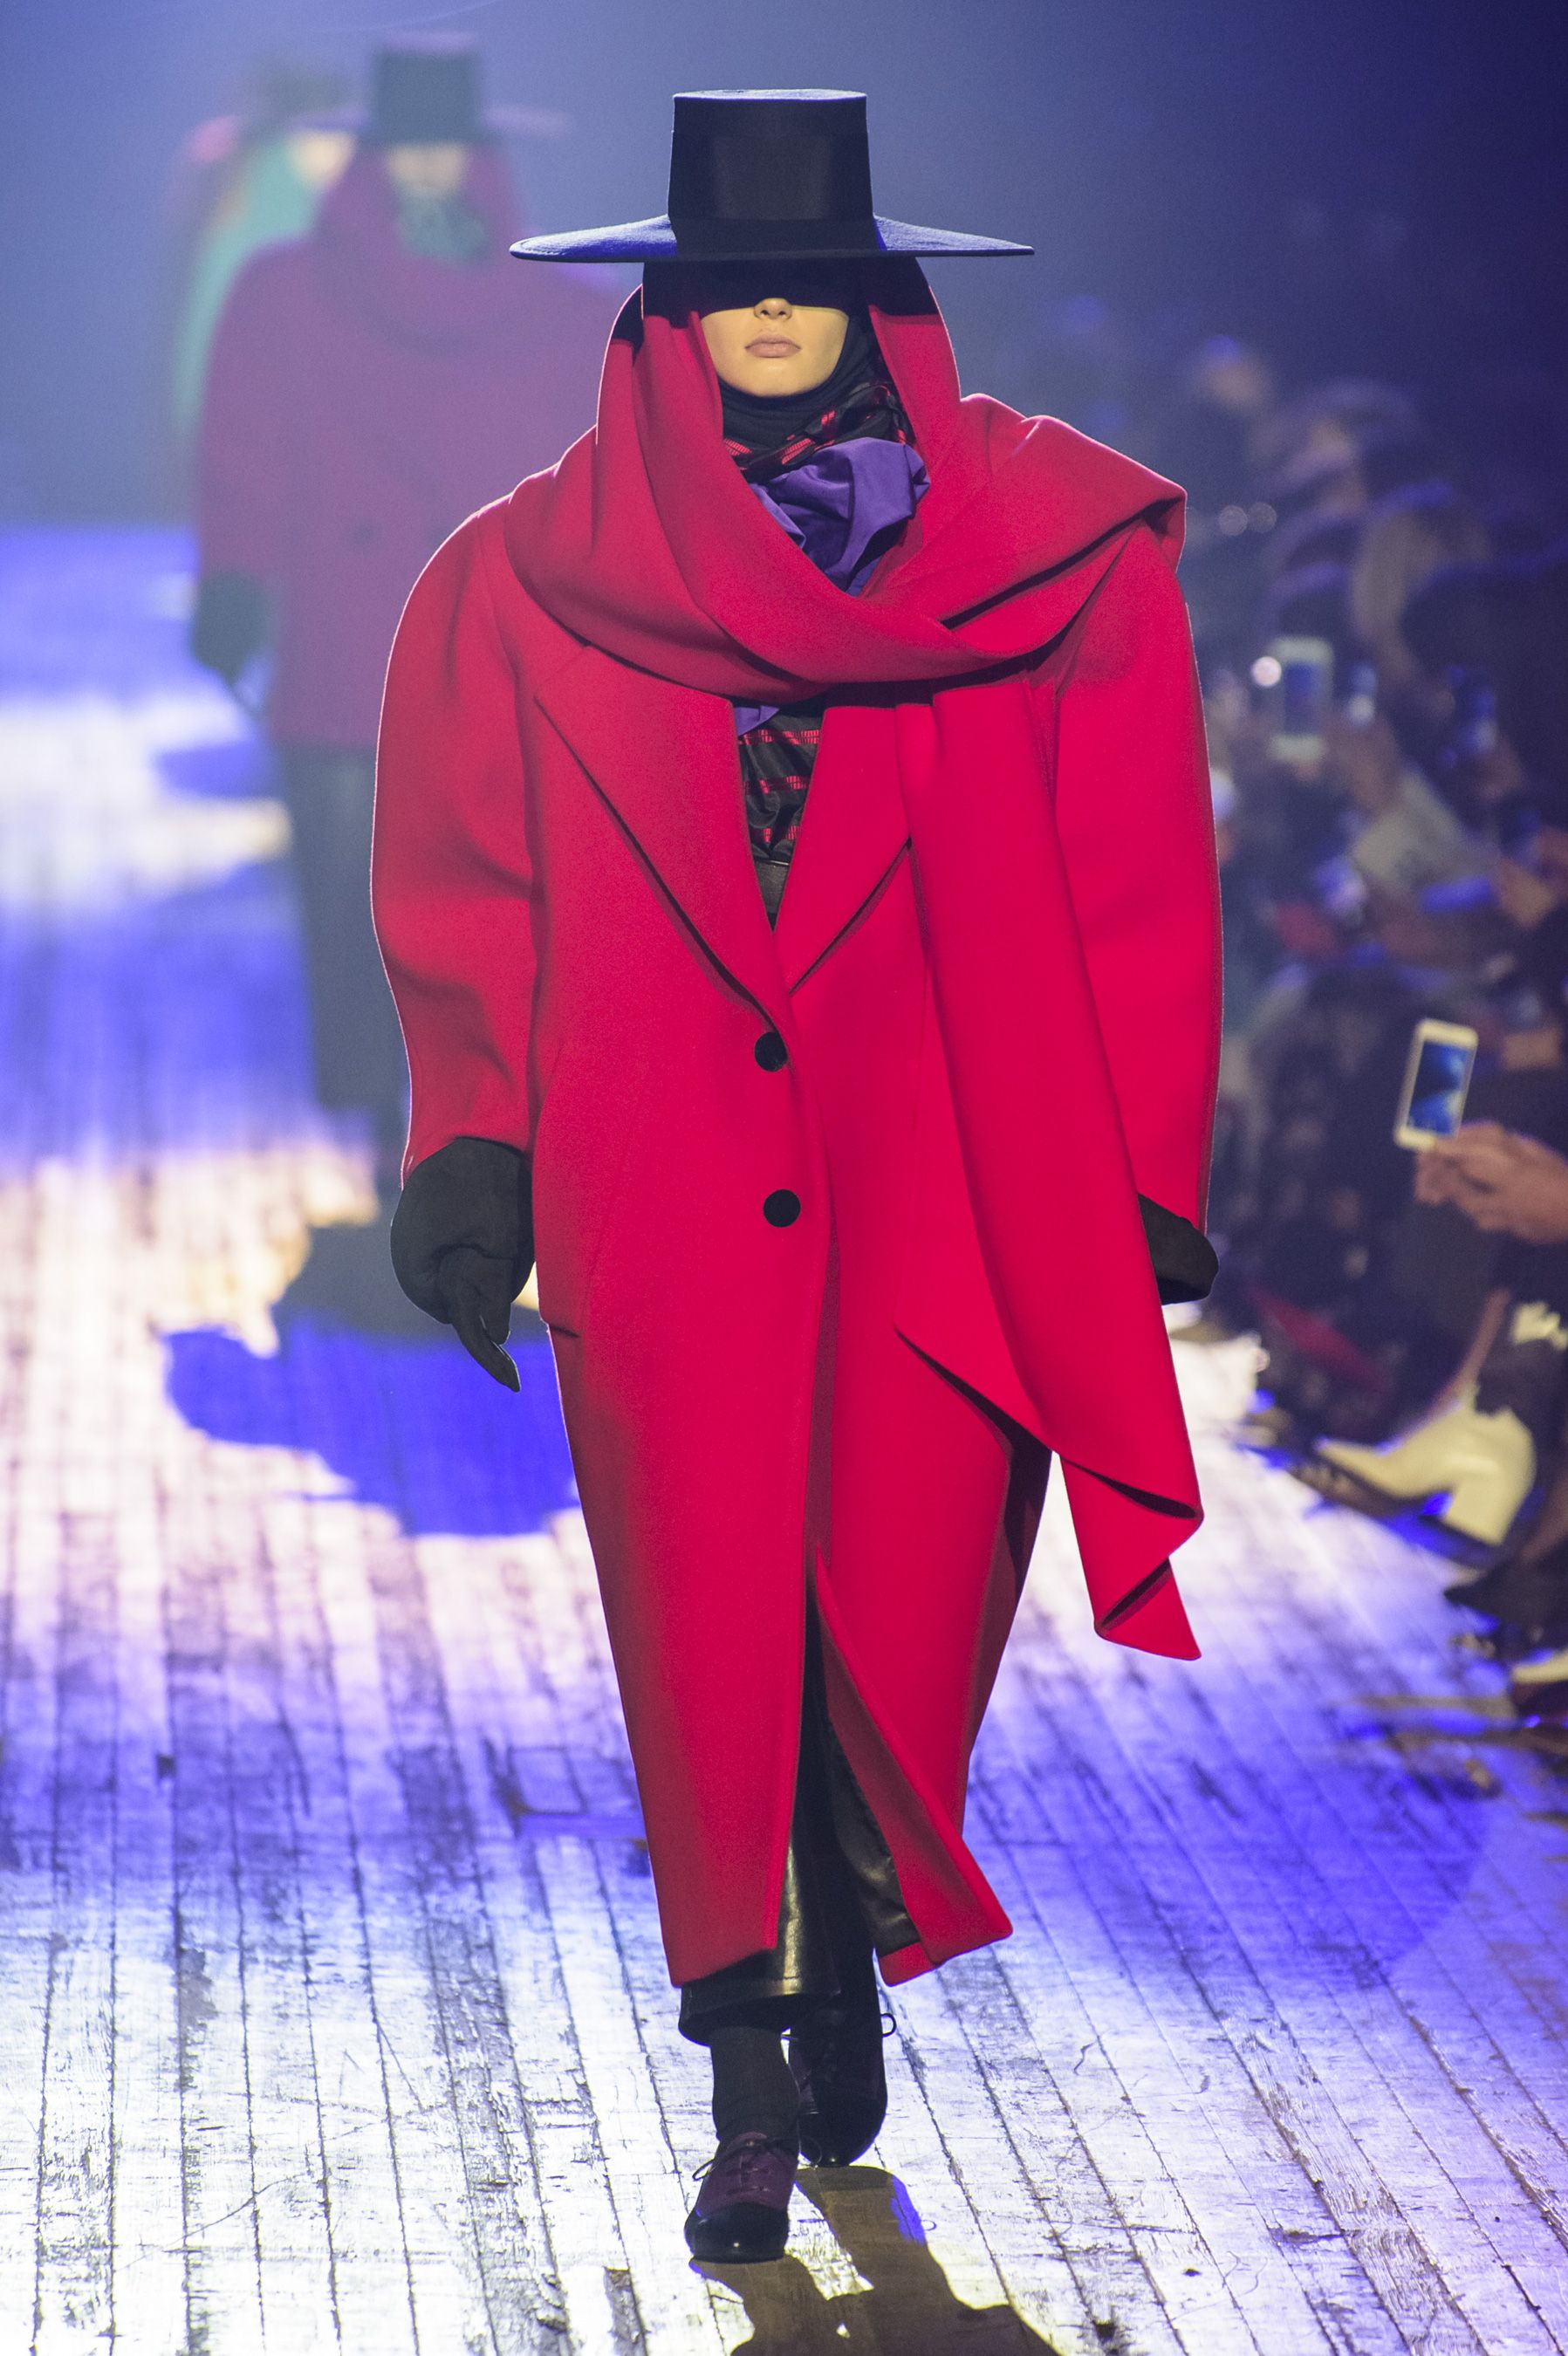 Marc Jacobs goes back to the future with 80s-inspired powersuits and prints, New York fashion week